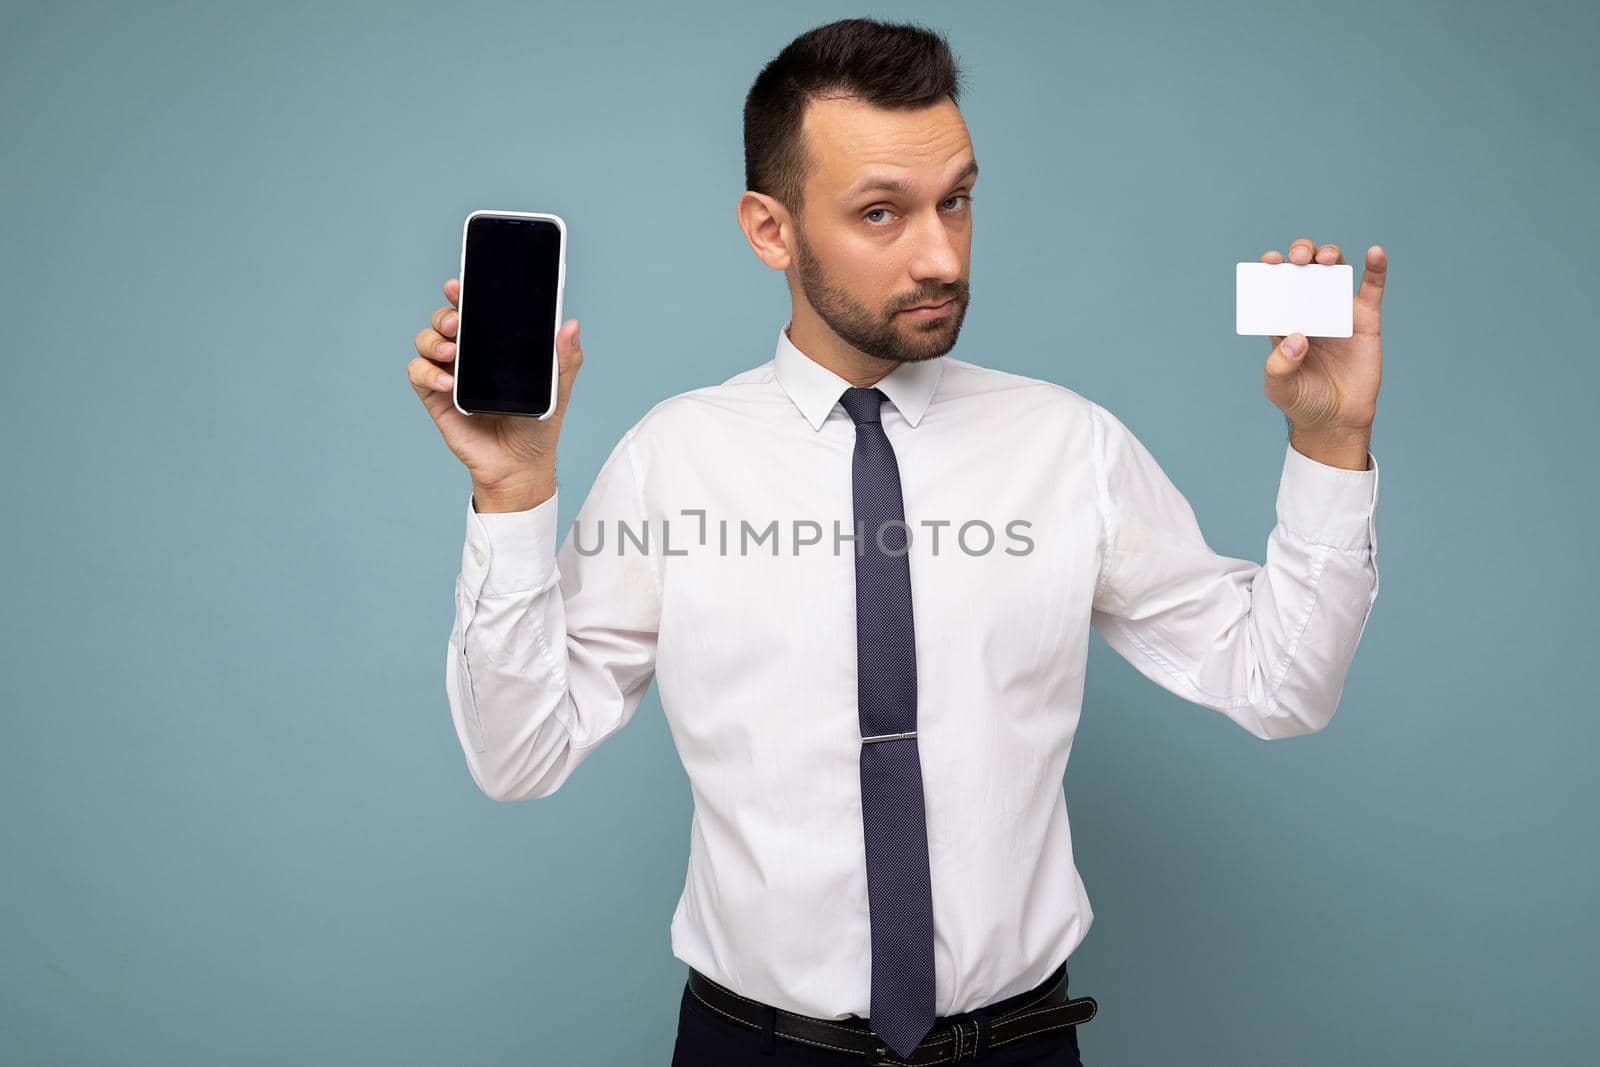 Handsome man wearing everyday clothes isolated on background wall holding and using phone and credit card making payment looking at camera.